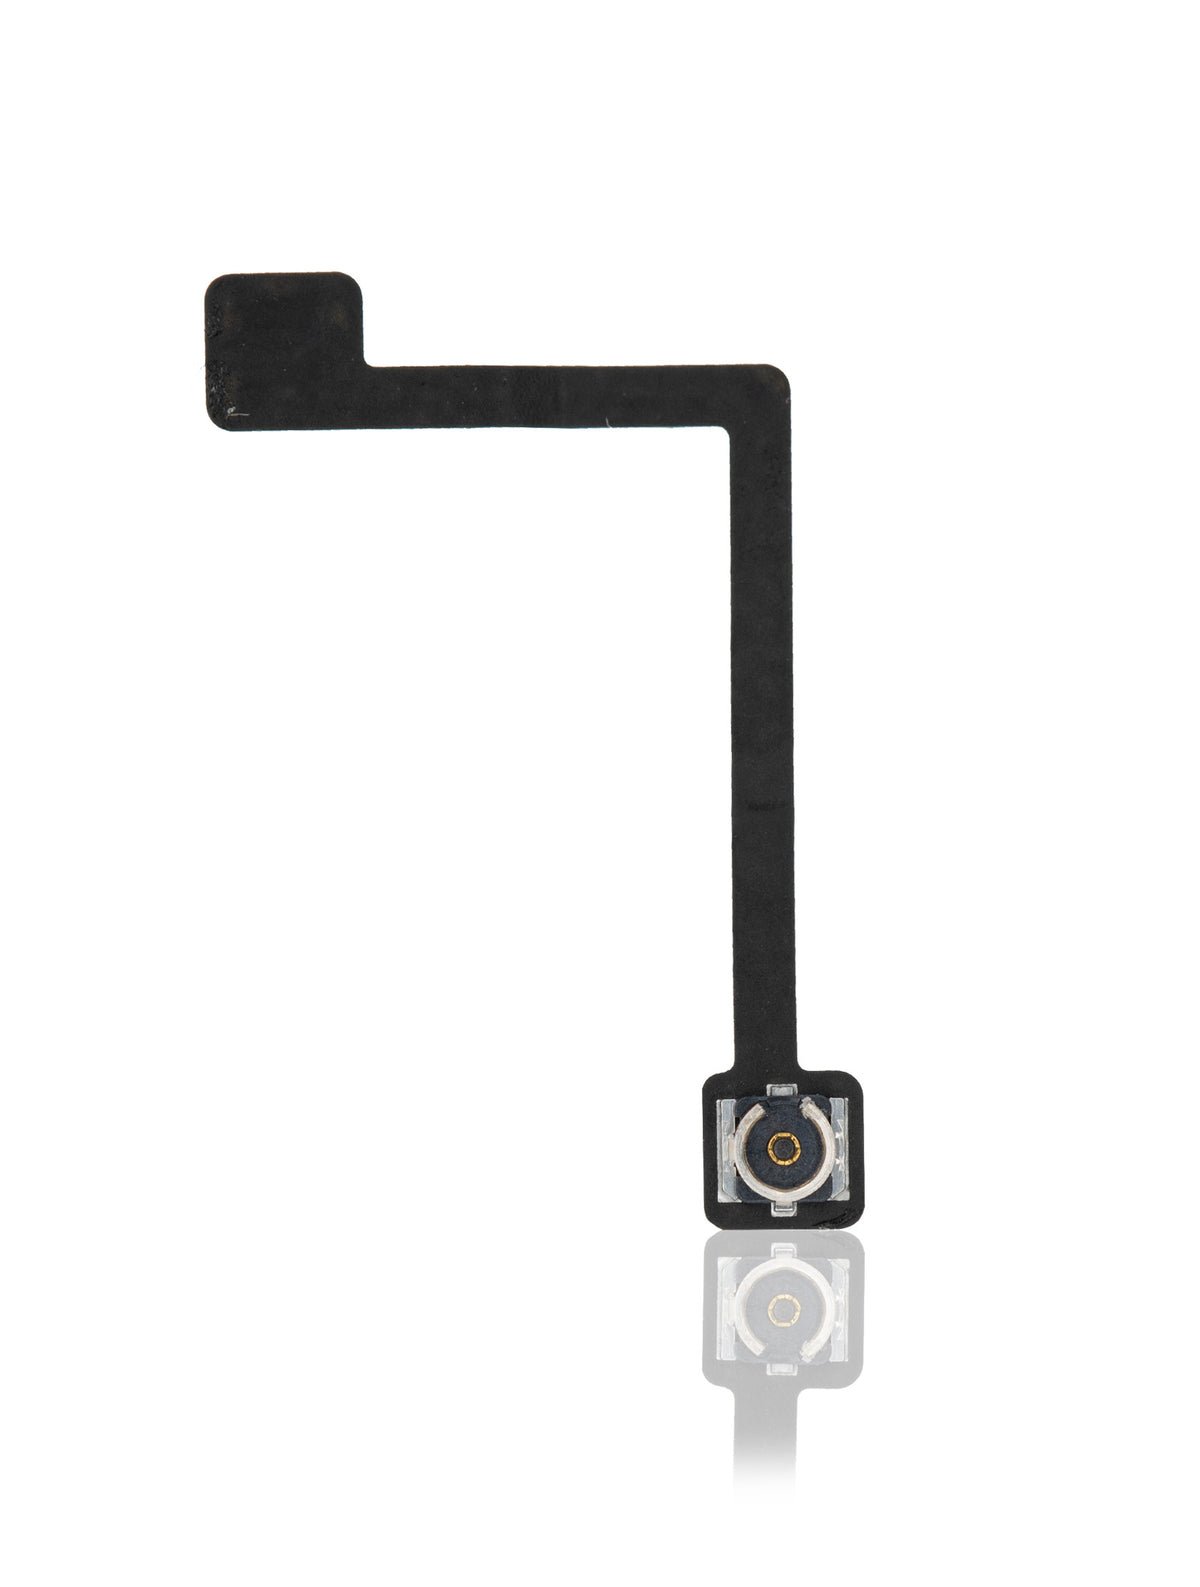 RIGHT ANTENNA CONNECTOR CABLE COMPATIBLE WITH IPAD PRO 10.5" 1ST